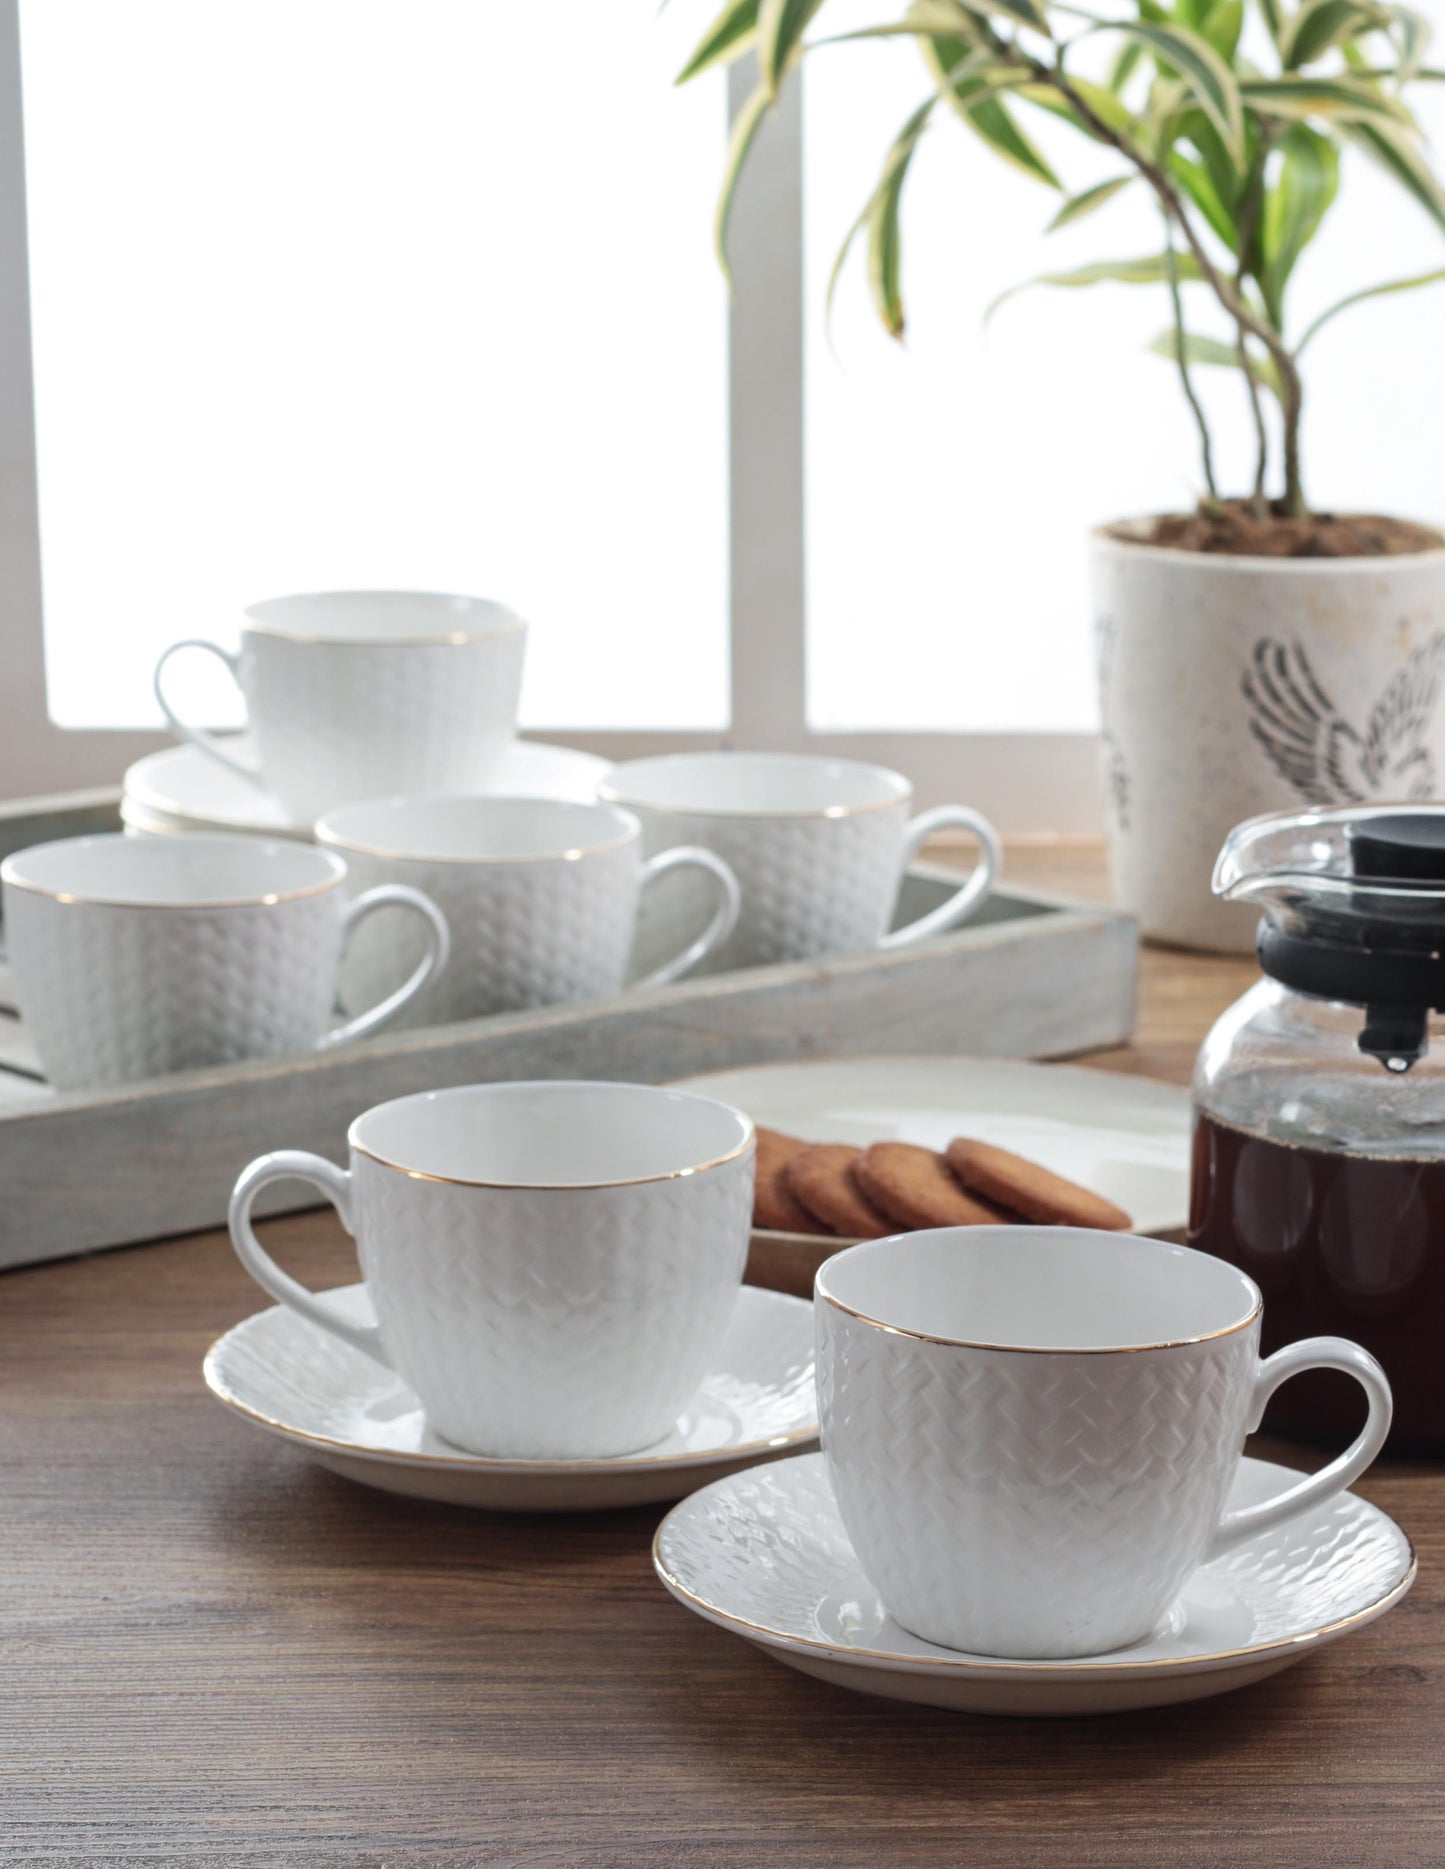 Cane Impression Cup & Saucer, 210ml, Set of 12 (6 Cups + 6 Saucers)